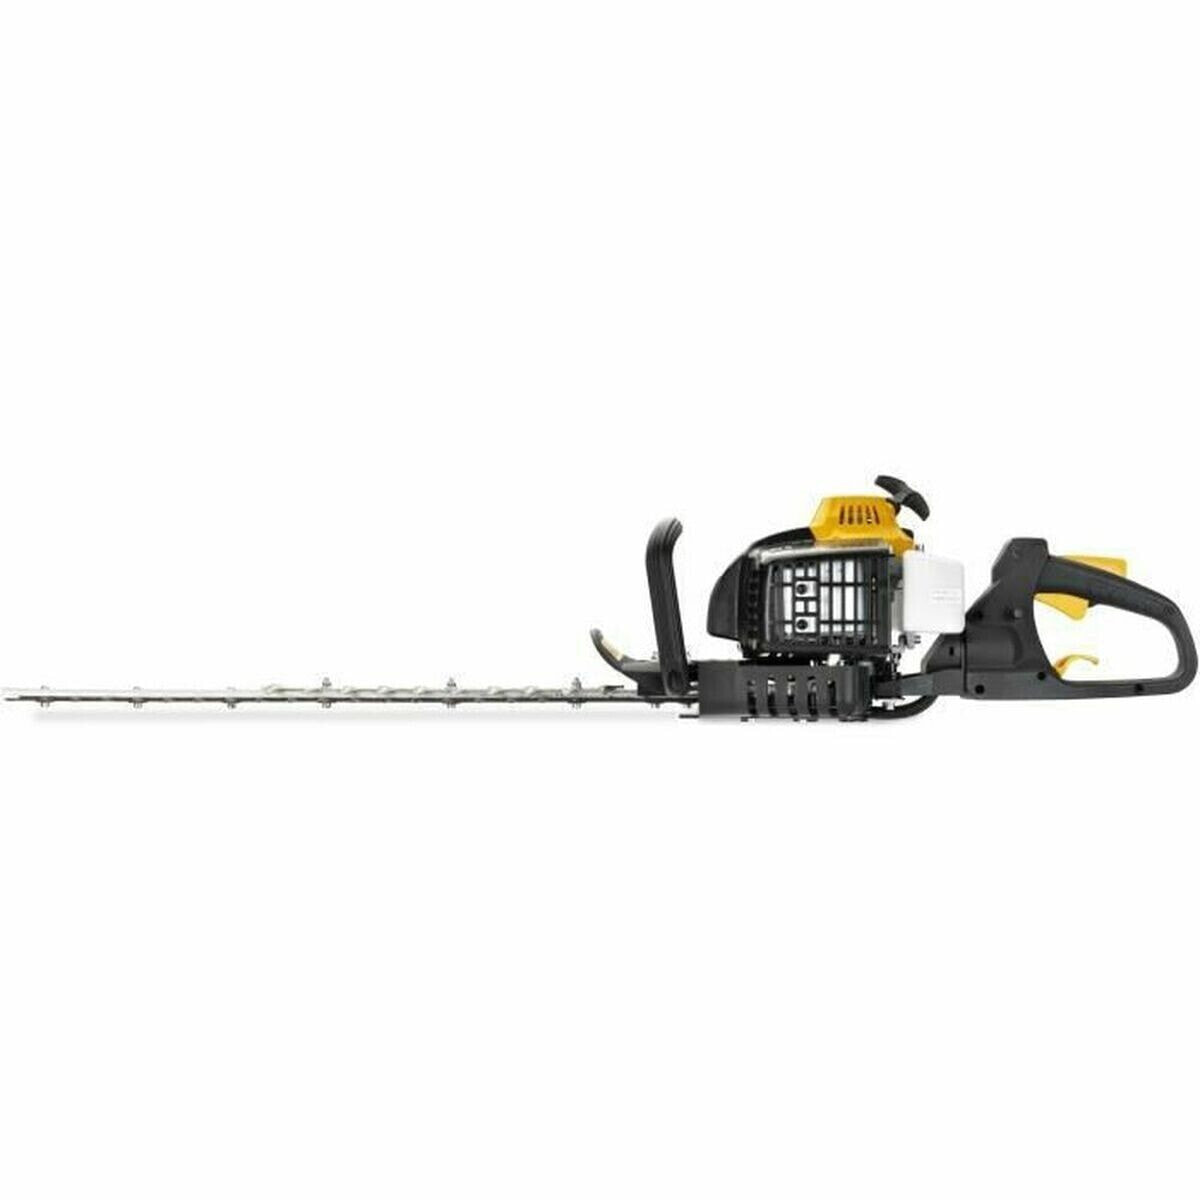 Hedge trimmer McCulloch 9676878-01 56 cm